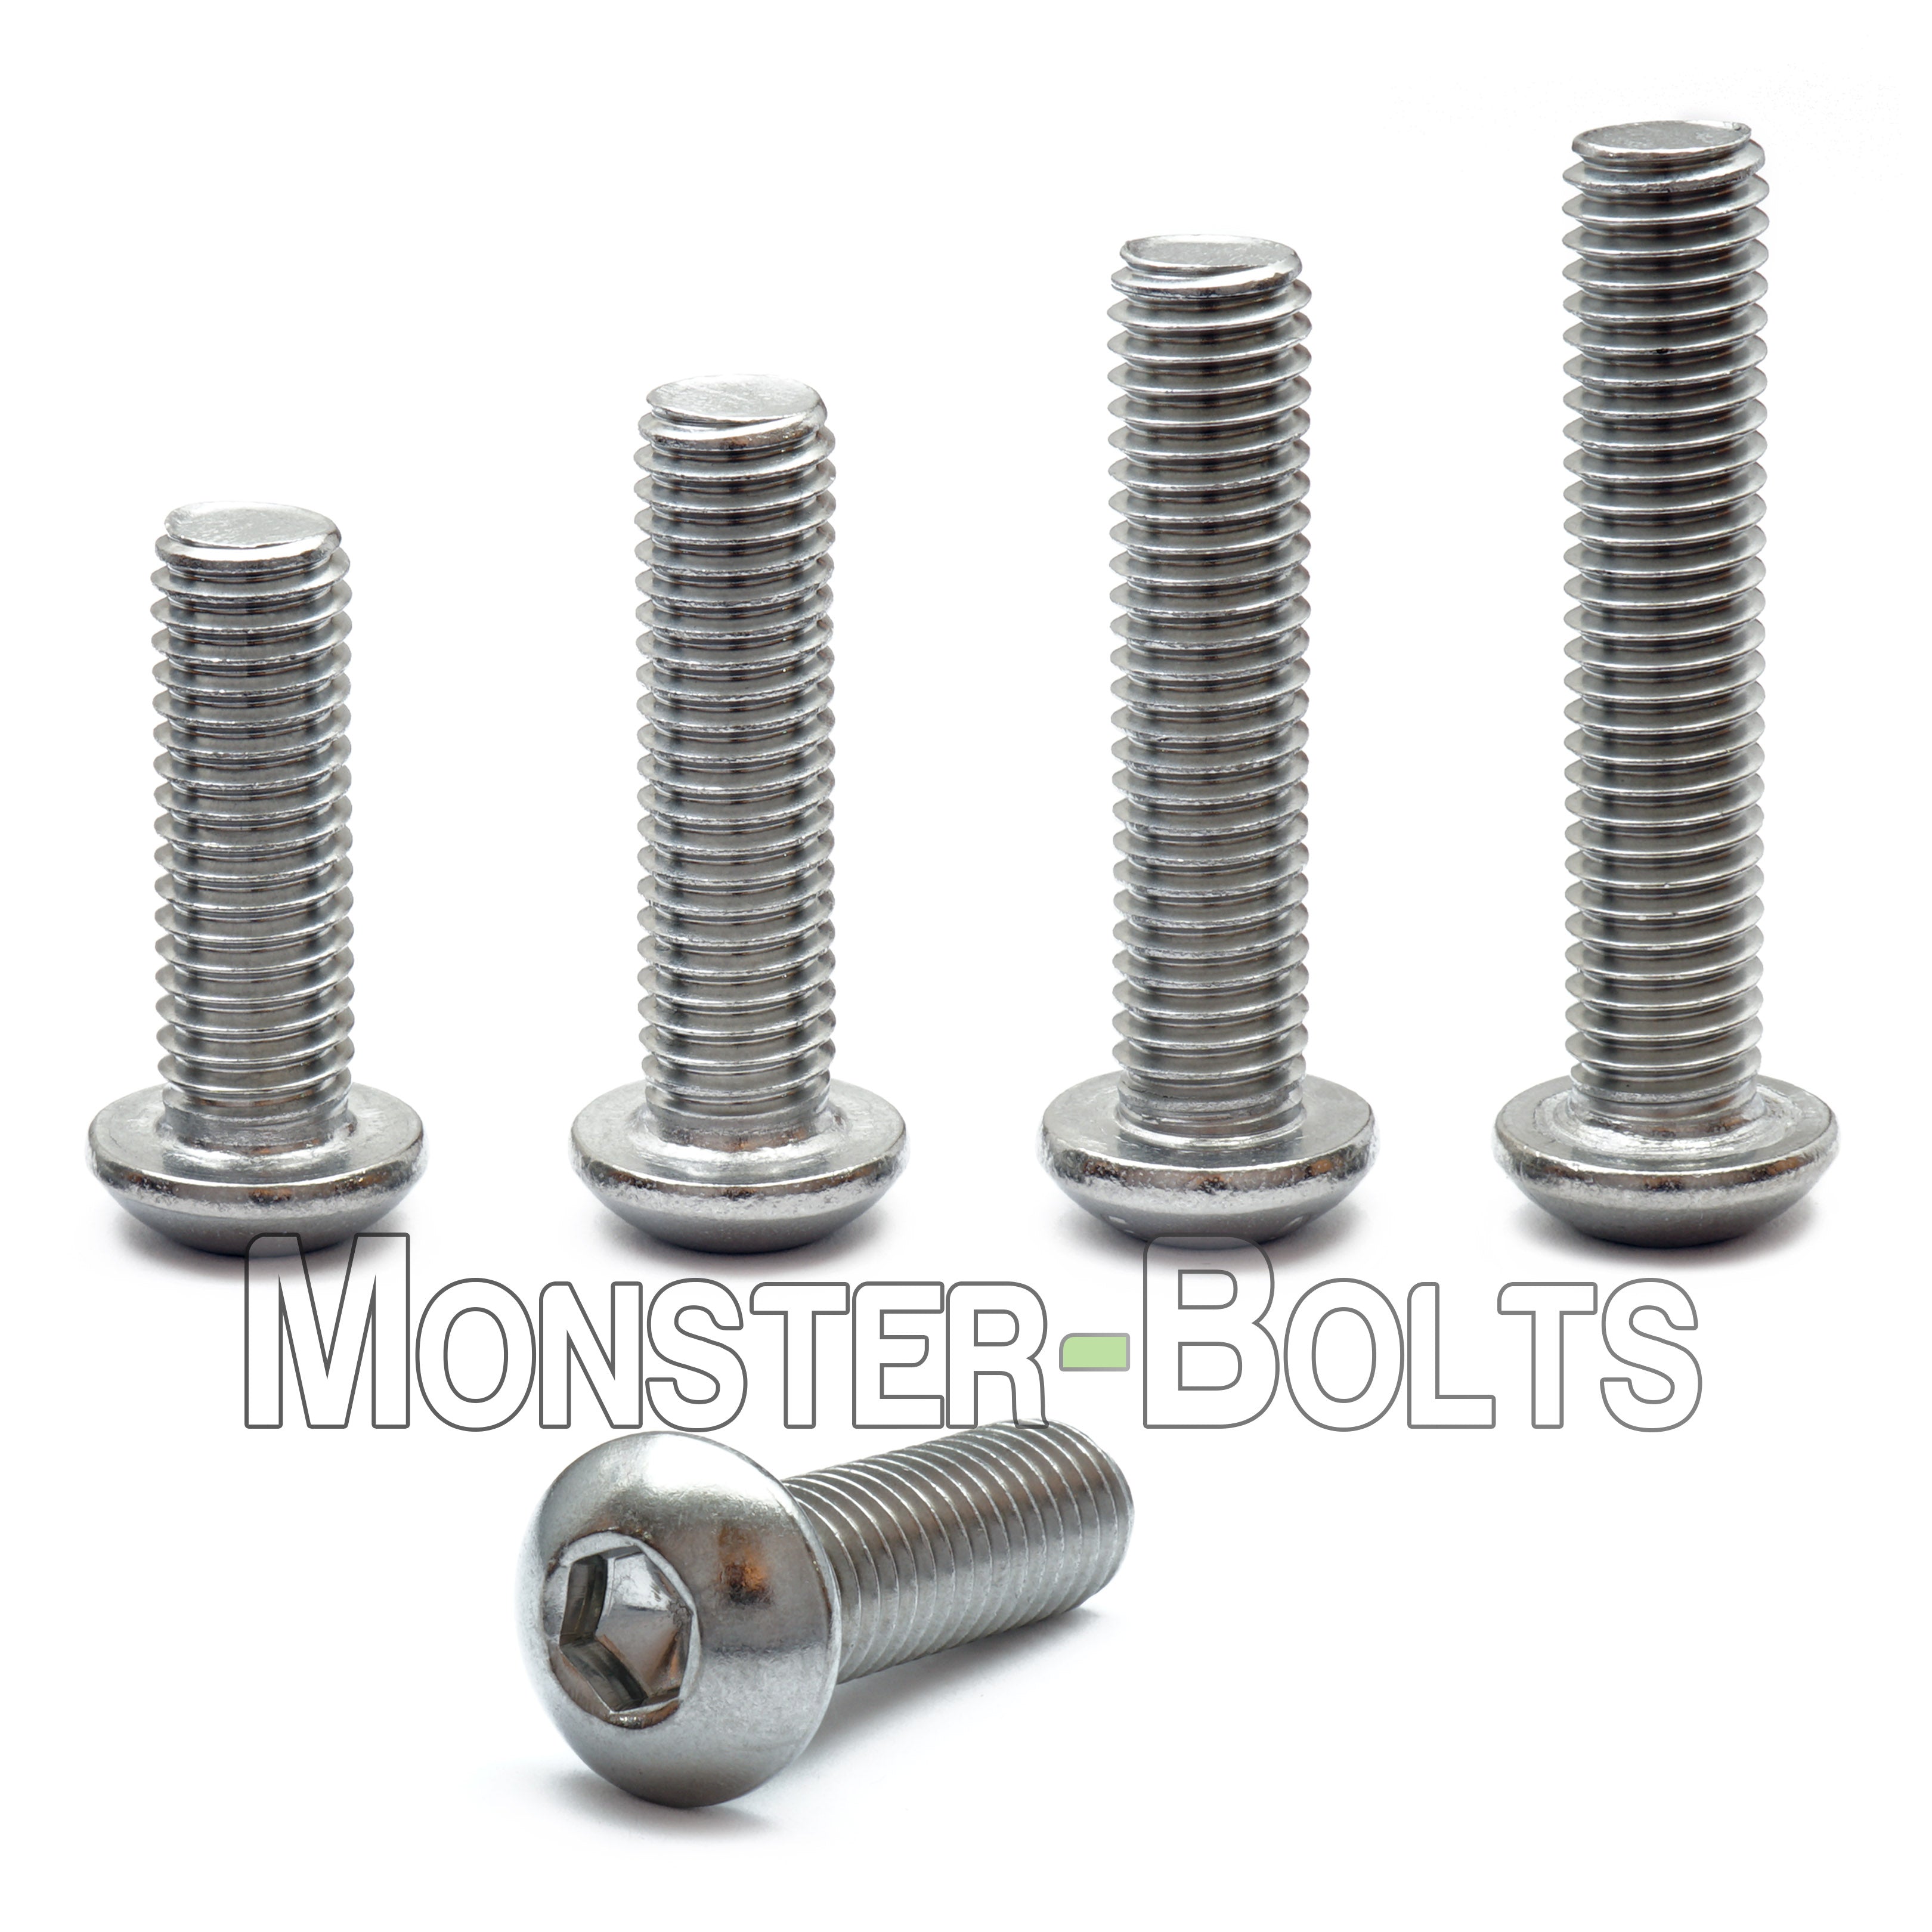 WASHERS M6 x 25MM x 10 SETS A2 STAINLESS STEEL HEX HEAD SETSCREWS HEX NUTS 